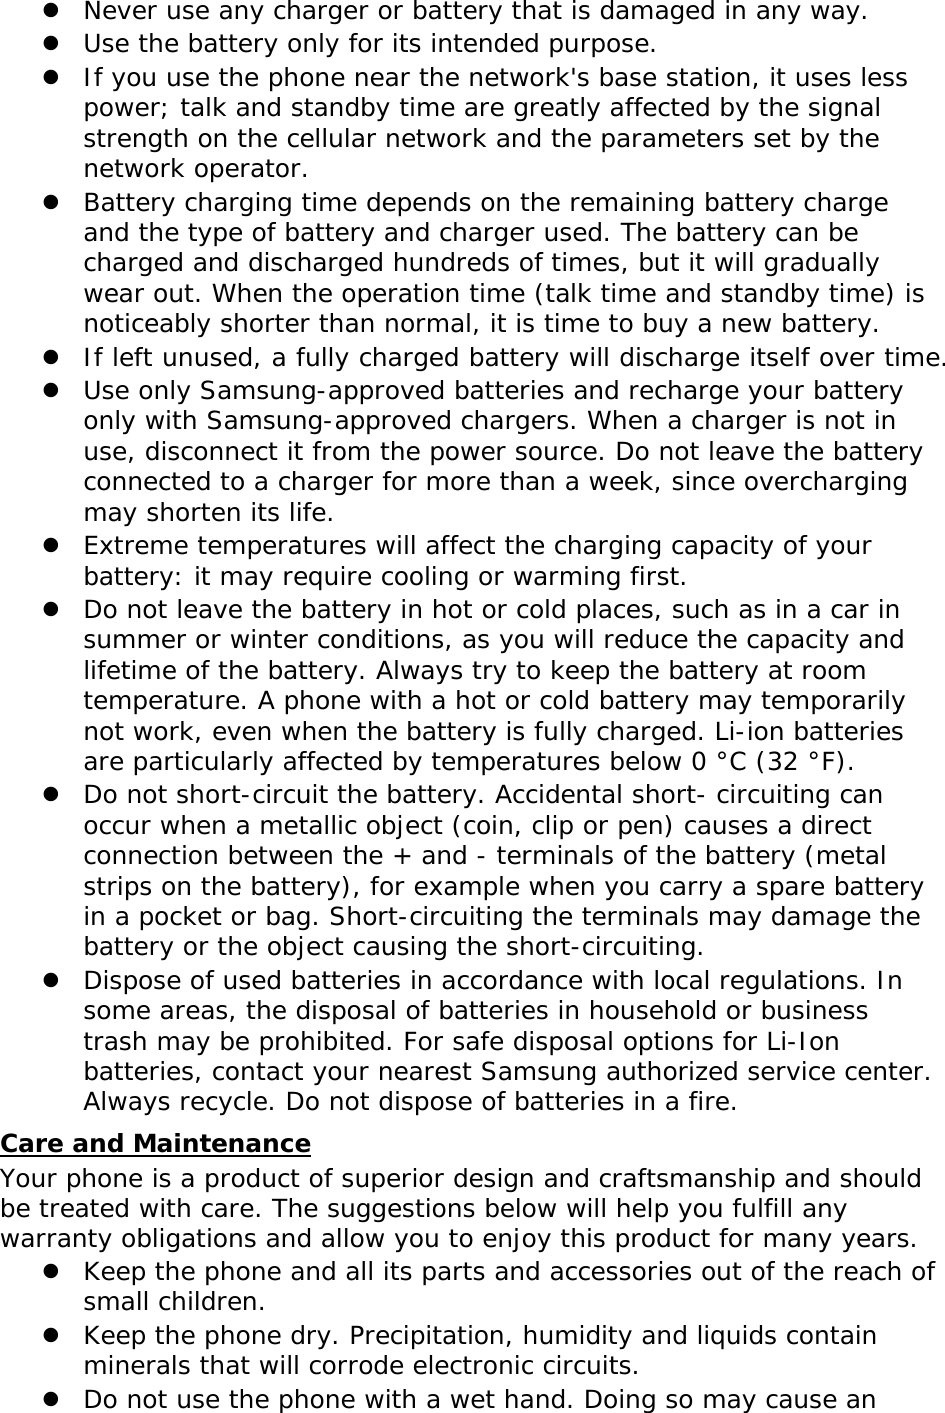 z Never use any charger or battery that is damaged in any way. z Use the battery only for its intended purpose. z If you use the phone near the network&apos;s base station, it uses less power; talk and standby time are greatly affected by the signal strength on the cellular network and the parameters set by the network operator. z Battery charging time depends on the remaining battery charge and the type of battery and charger used. The battery can be charged and discharged hundreds of times, but it will gradually wear out. When the operation time (talk time and standby time) is noticeably shorter than normal, it is time to buy a new battery. z If left unused, a fully charged battery will discharge itself over time. z Use only Samsung-approved batteries and recharge your battery only with Samsung-approved chargers. When a charger is not in use, disconnect it from the power source. Do not leave the battery connected to a charger for more than a week, since overcharging may shorten its life. z Extreme temperatures will affect the charging capacity of your battery: it may require cooling or warming first. z Do not leave the battery in hot or cold places, such as in a car in summer or winter conditions, as you will reduce the capacity and lifetime of the battery. Always try to keep the battery at room temperature. A phone with a hot or cold battery may temporarily not work, even when the battery is fully charged. Li-ion batteries are particularly affected by temperatures below 0 °C (32 °F). z Do not short-circuit the battery. Accidental short- circuiting can occur when a metallic object (coin, clip or pen) causes a direct connection between the + and - terminals of the battery (metal strips on the battery), for example when you carry a spare battery in a pocket or bag. Short-circuiting the terminals may damage the battery or the object causing the short-circuiting. z Dispose of used batteries in accordance with local regulations. In some areas, the disposal of batteries in household or business trash may be prohibited. For safe disposal options for Li-Ion batteries, contact your nearest Samsung authorized service center. Always recycle. Do not dispose of batteries in a fire. Care and Maintenance Your phone is a product of superior design and craftsmanship and should be treated with care. The suggestions below will help you fulfill any warranty obligations and allow you to enjoy this product for many years. z Keep the phone and all its parts and accessories out of the reach of small children. z Keep the phone dry. Precipitation, humidity and liquids contain minerals that will corrode electronic circuits. z Do not use the phone with a wet hand. Doing so may cause an 